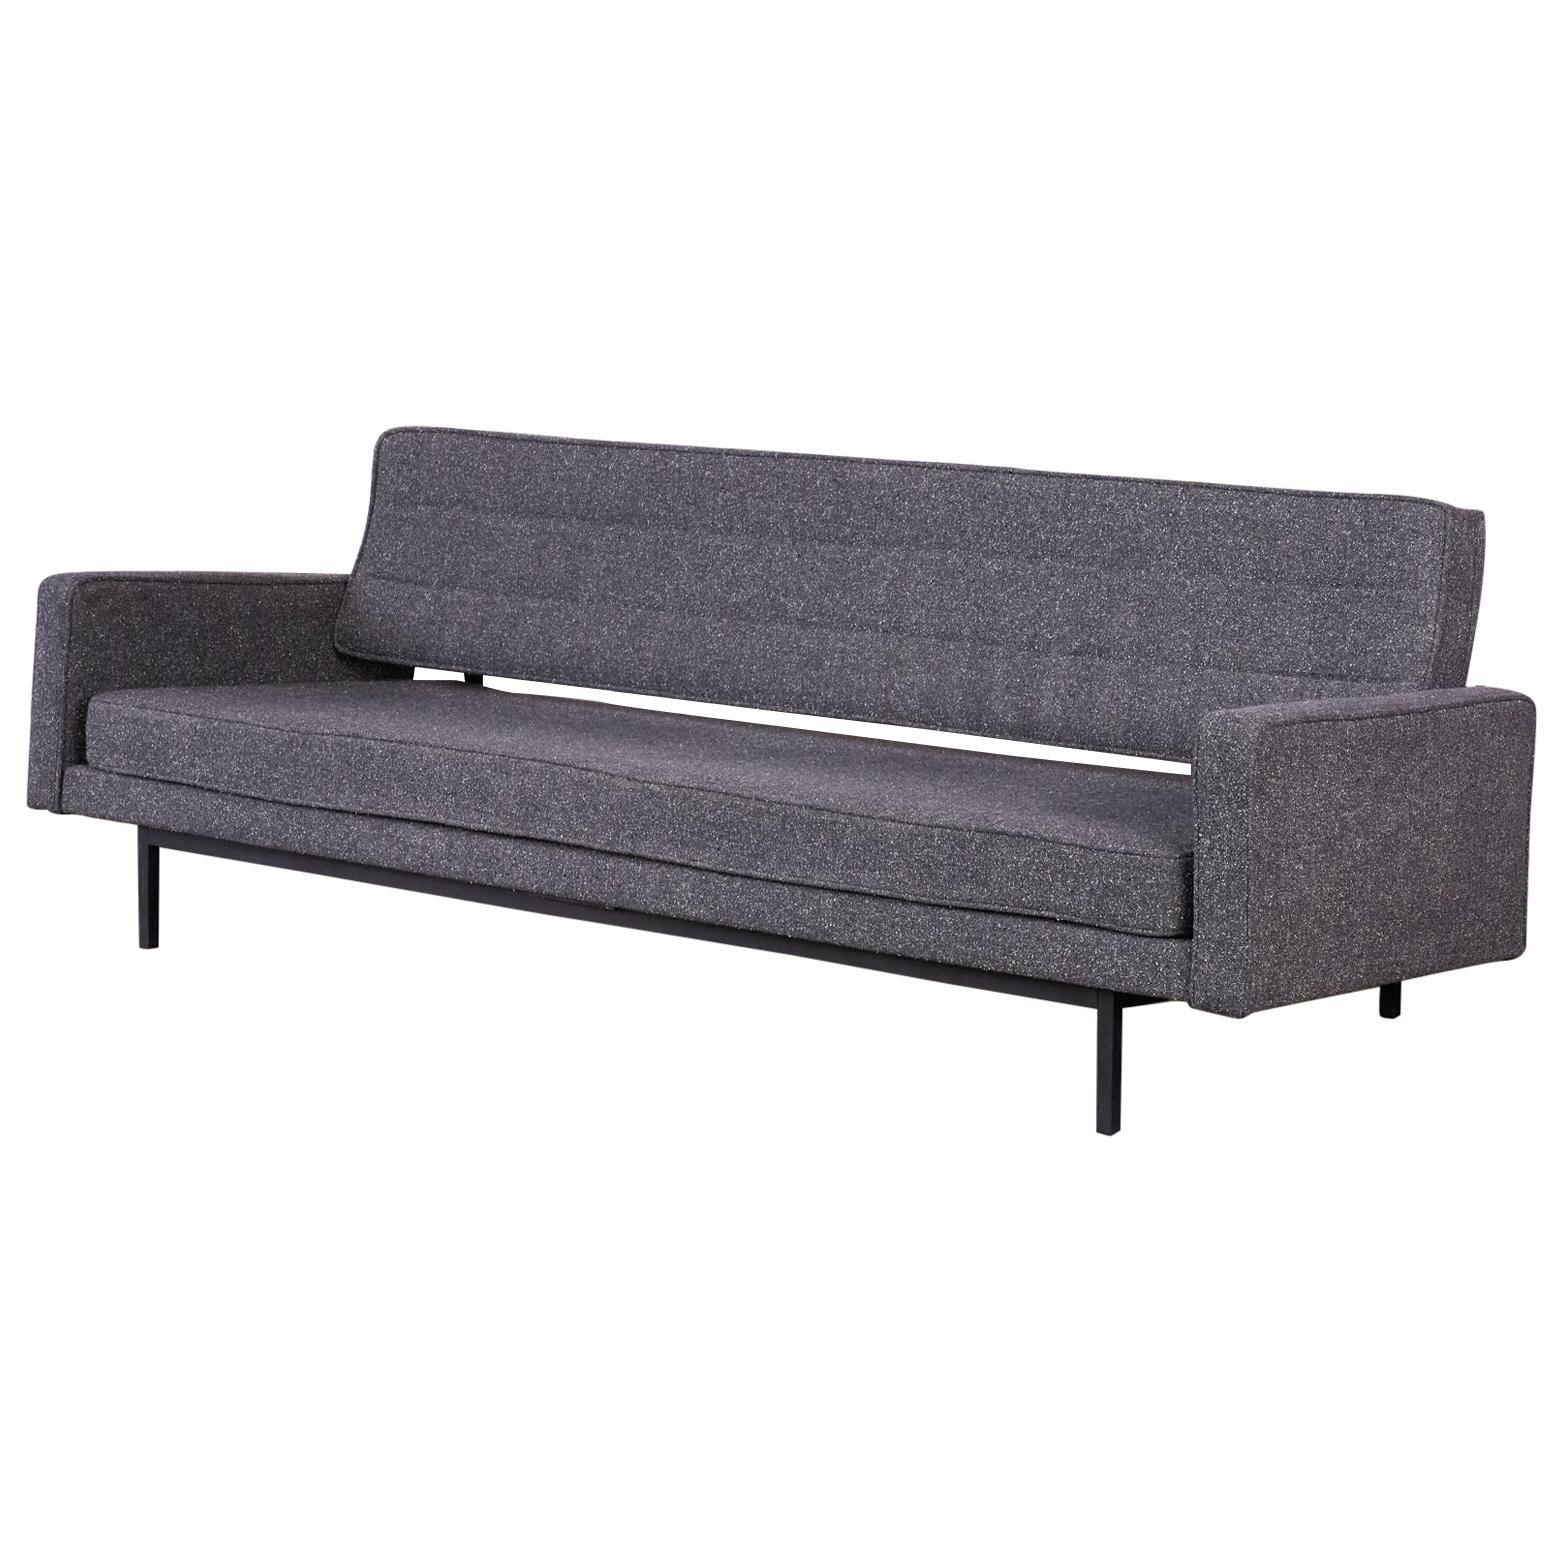 Richard Schultz for Knoll Convertible Sofa/Daybed